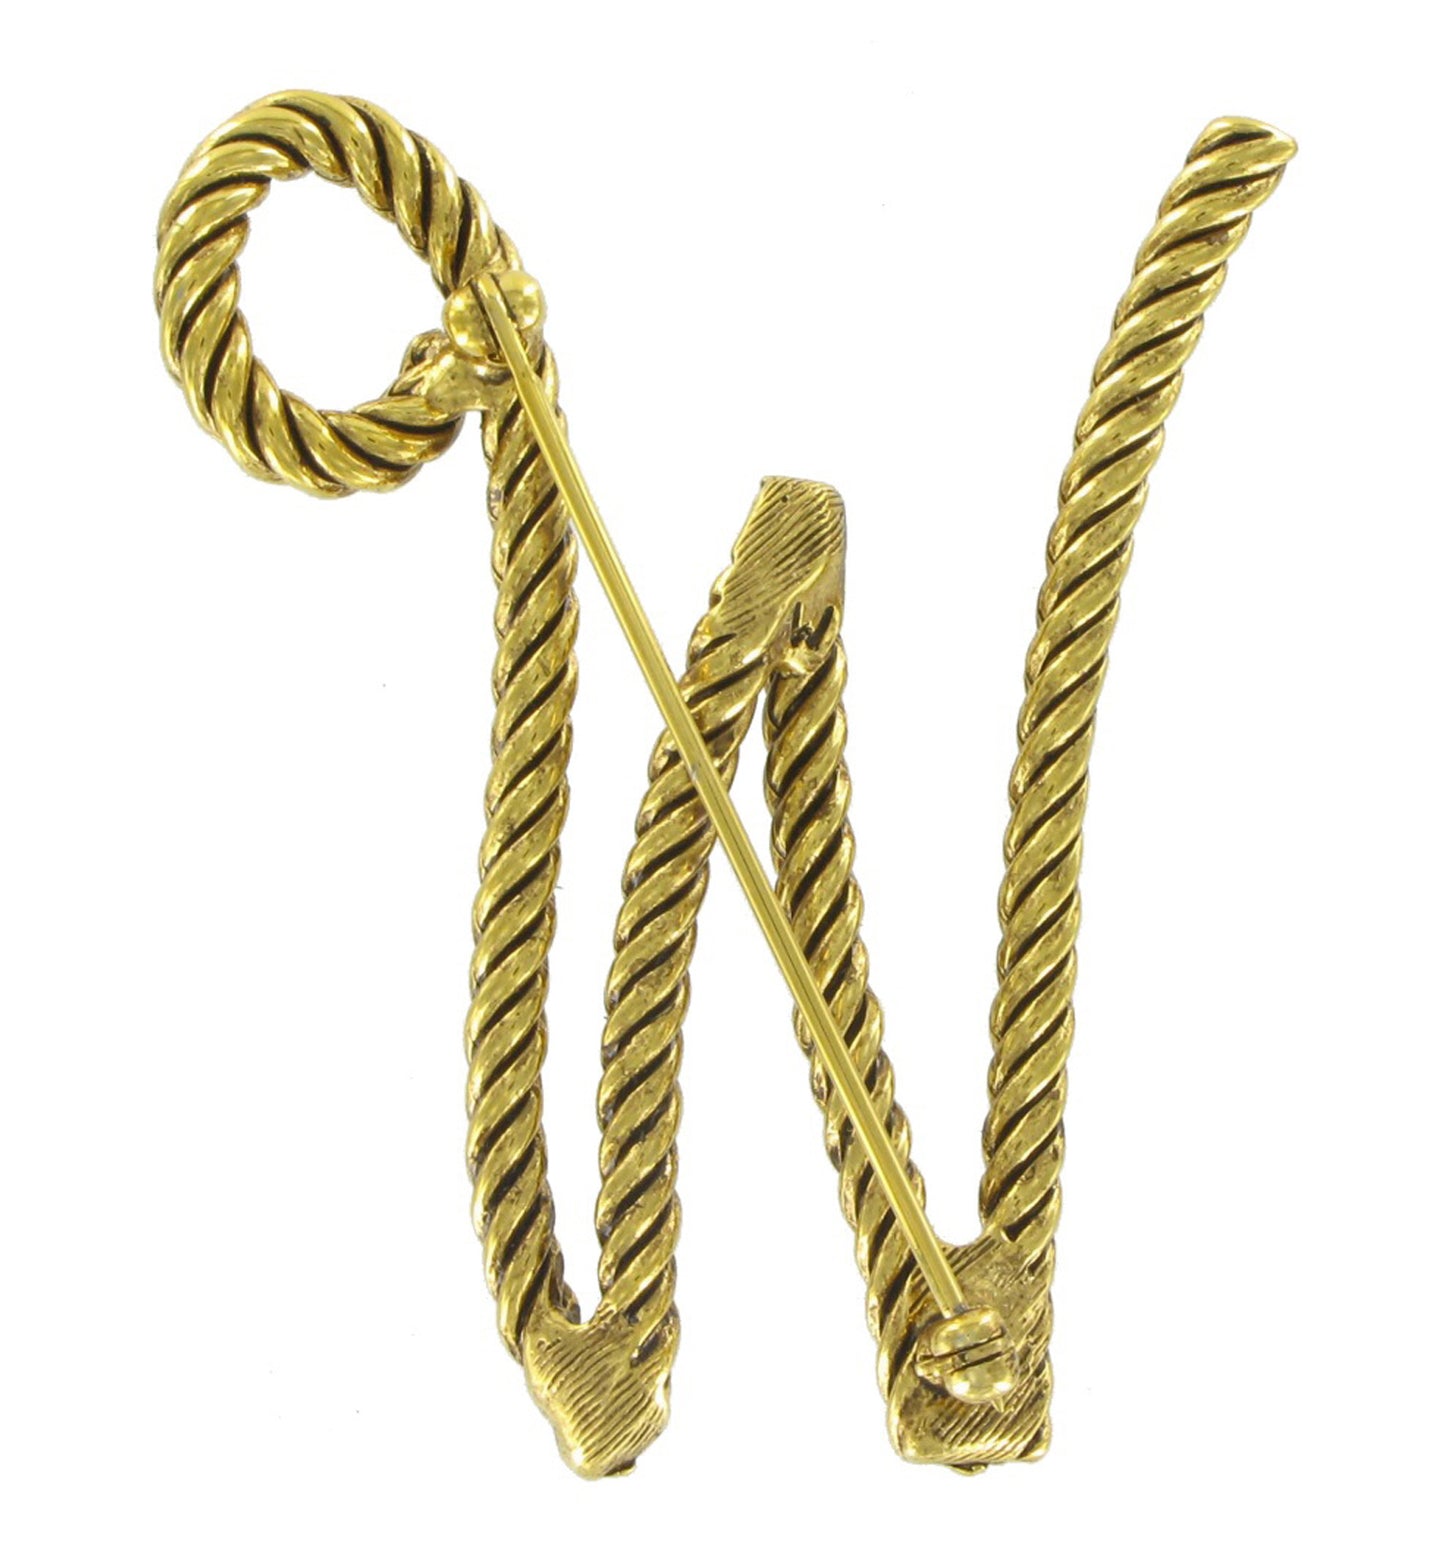 Large Script Gold Tone Rope Initial "W" Pin Brooch 2 1/2"